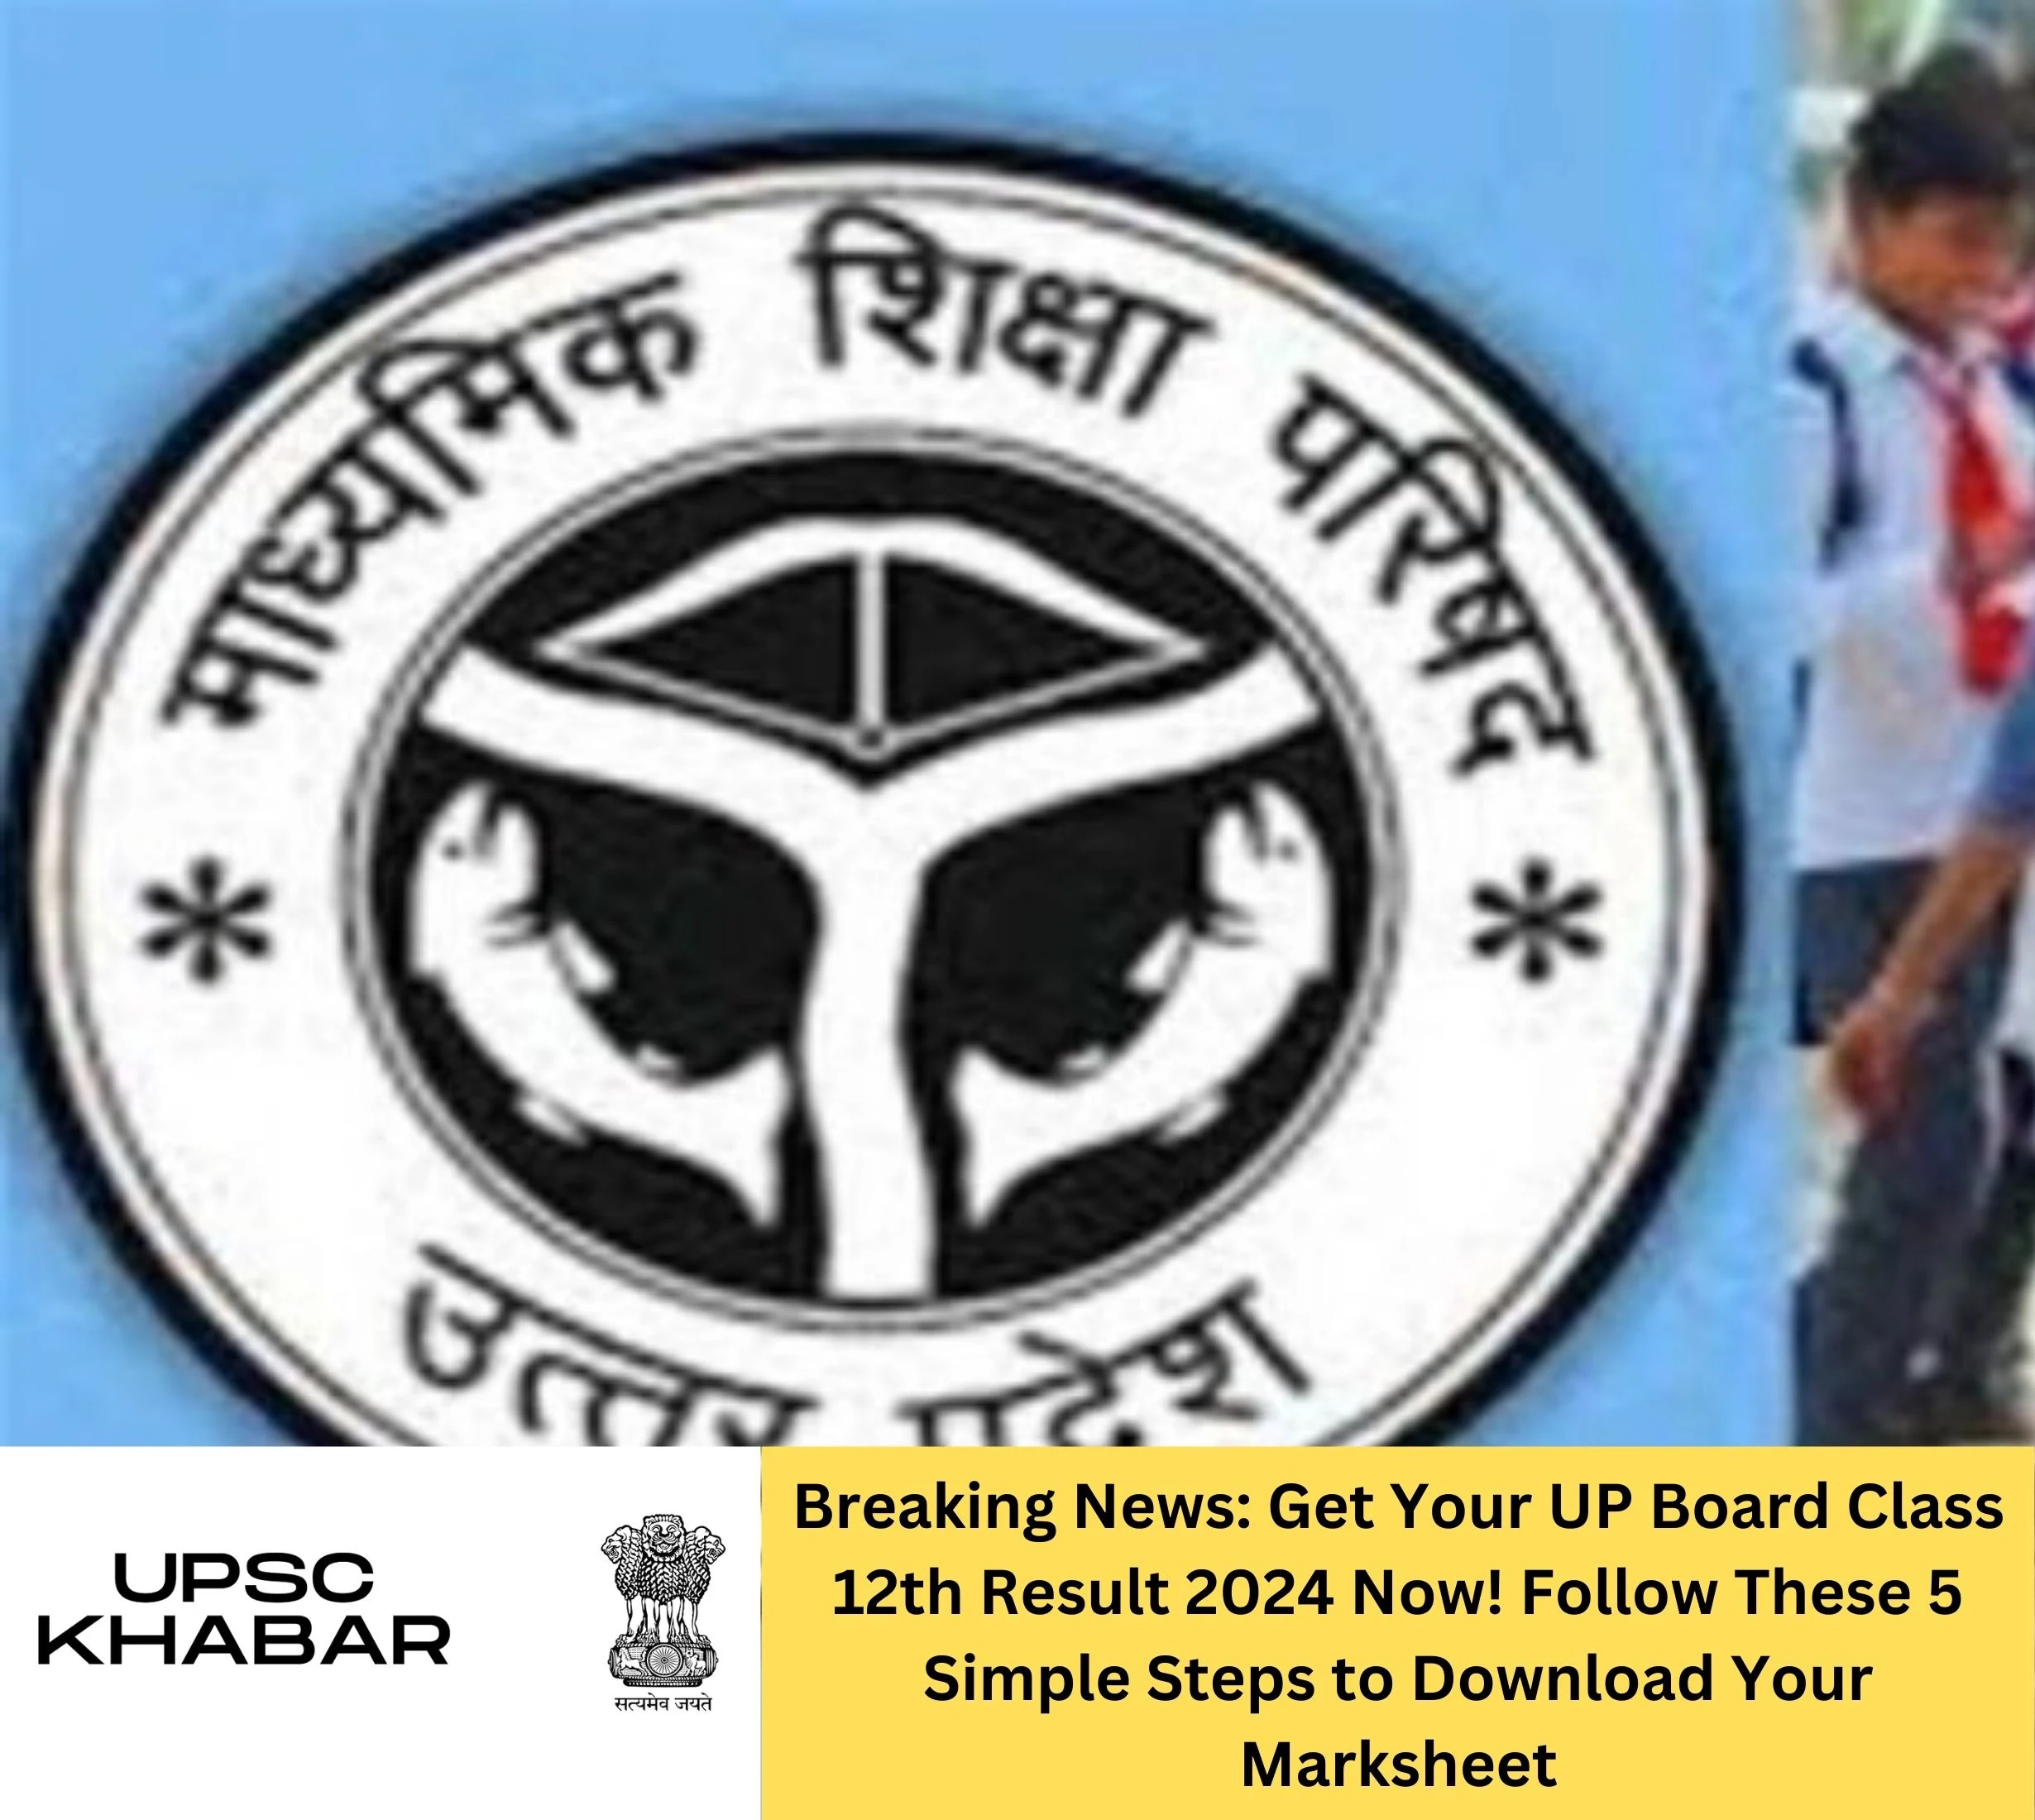 Breaking News: Get Your UP Board Class 12th Result 2024 Now! Follow These 5 Simple Steps to Download Your Marksheet